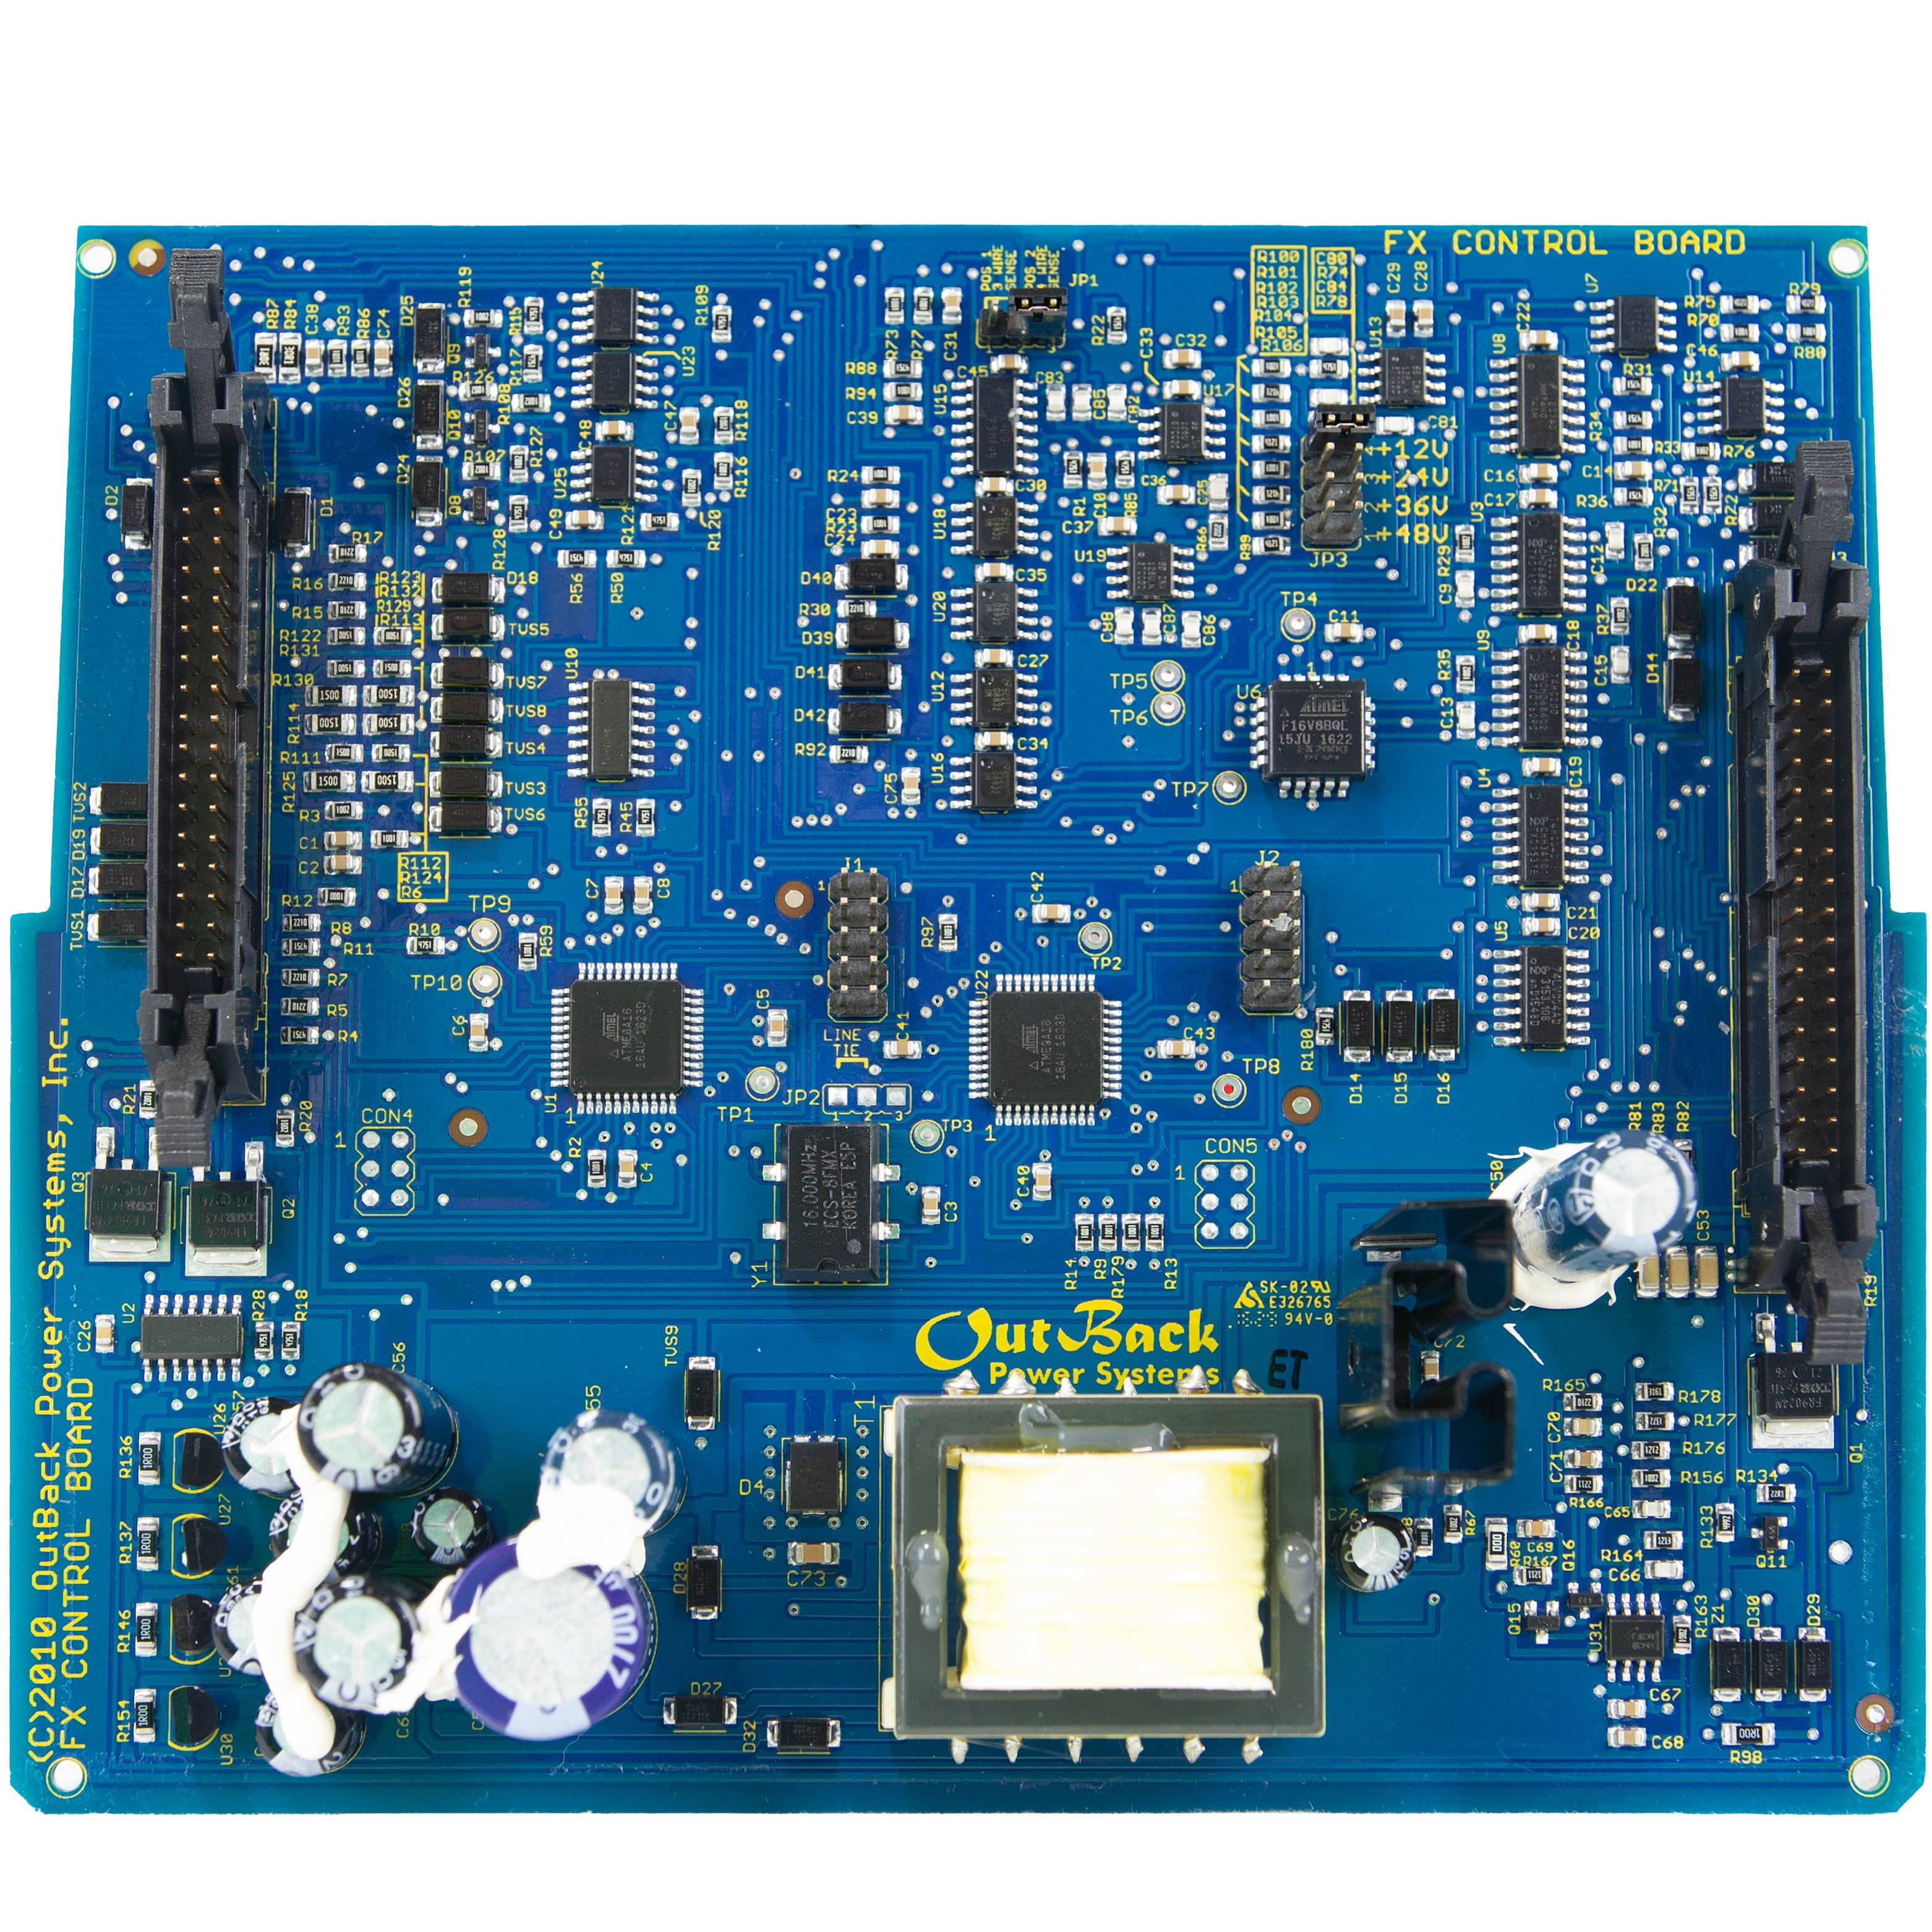 outback power 200 2012 10 control board